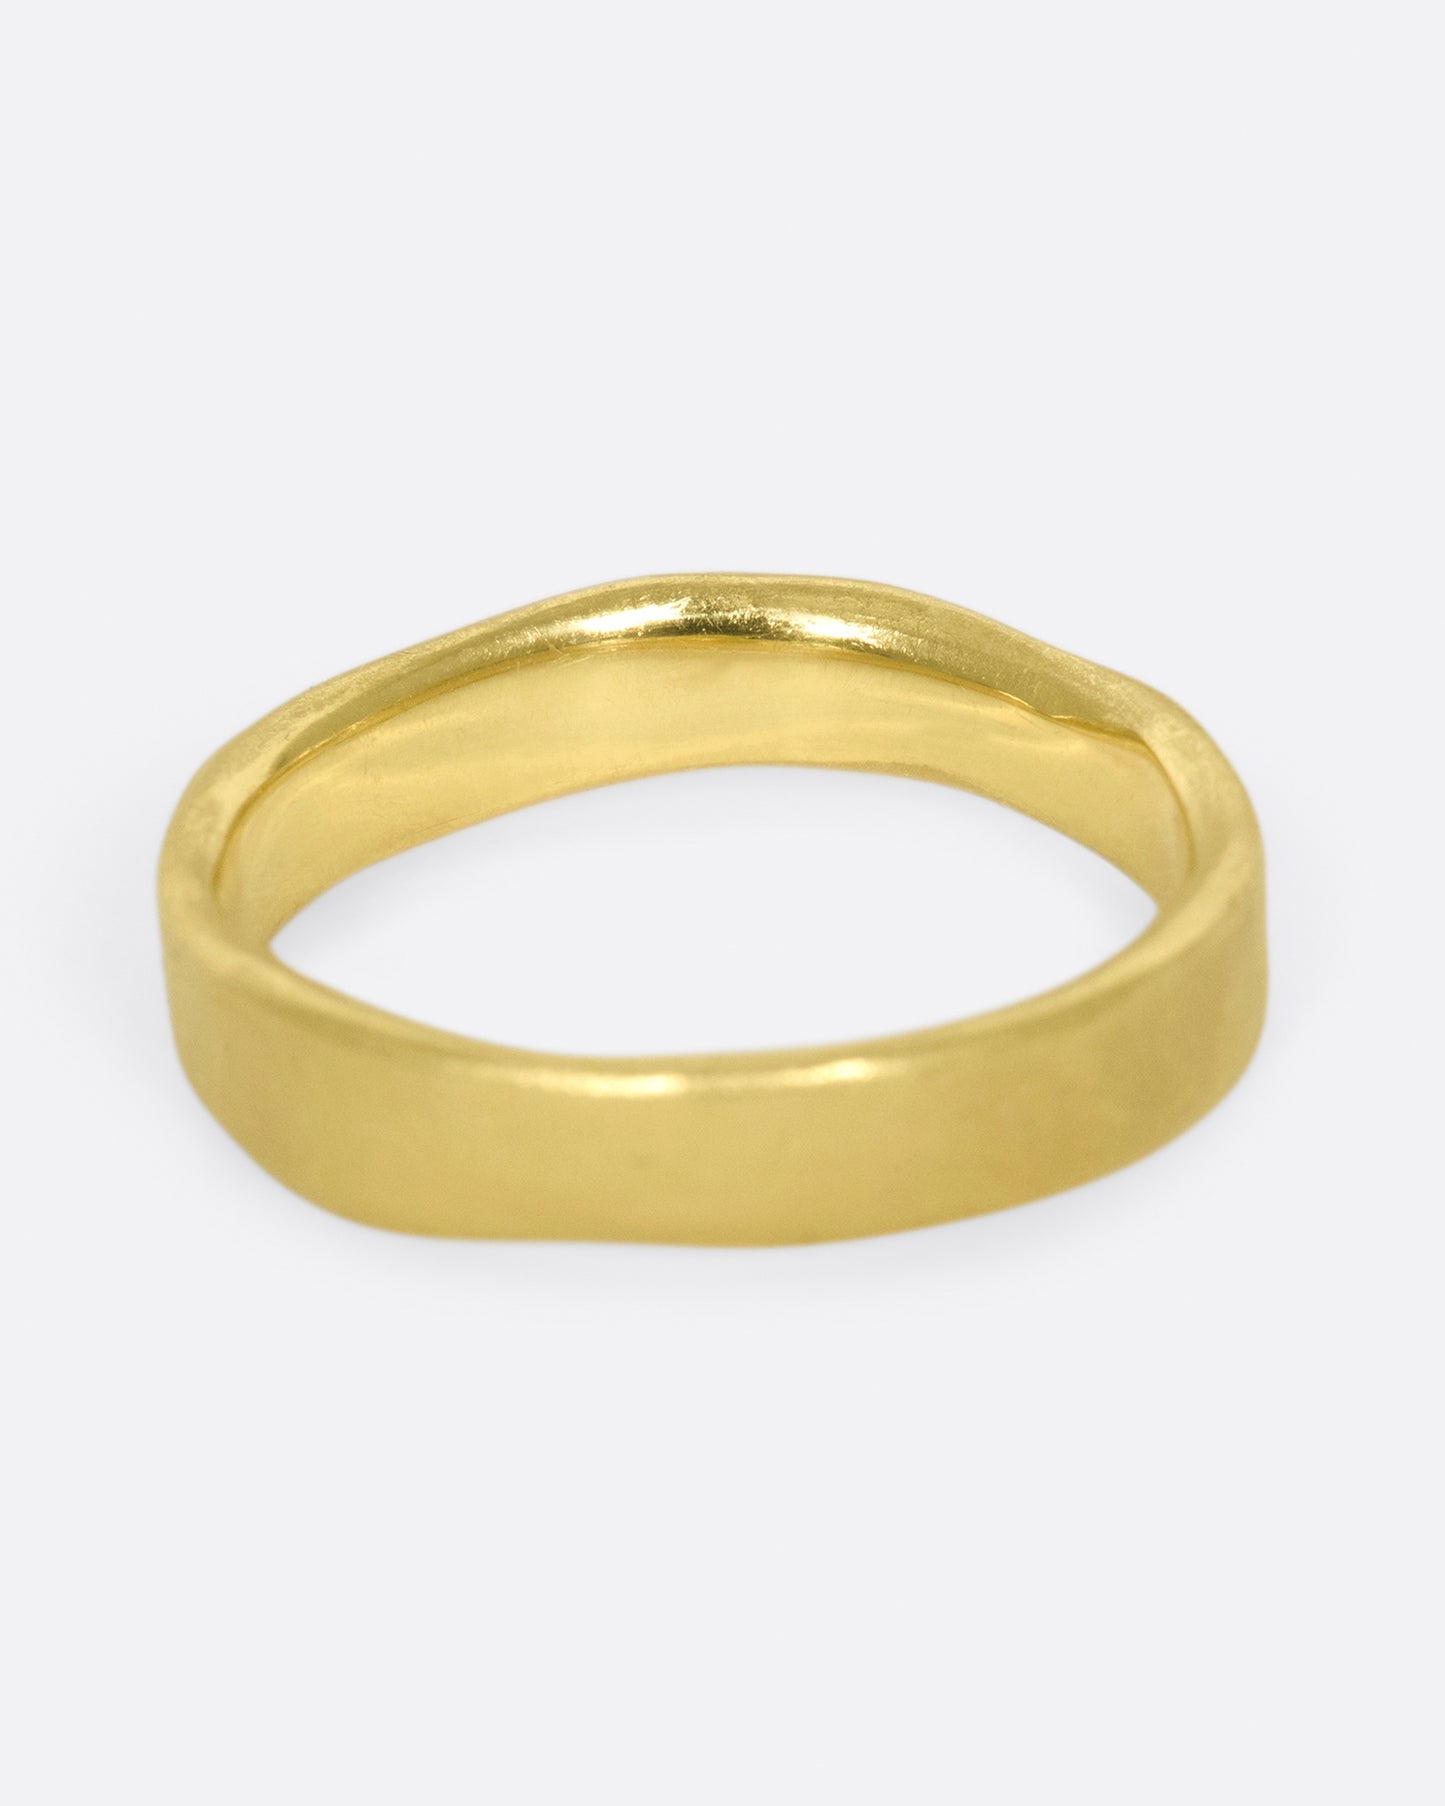 A hand-formed, brushed gold band with two rows of diamonds along half of it.